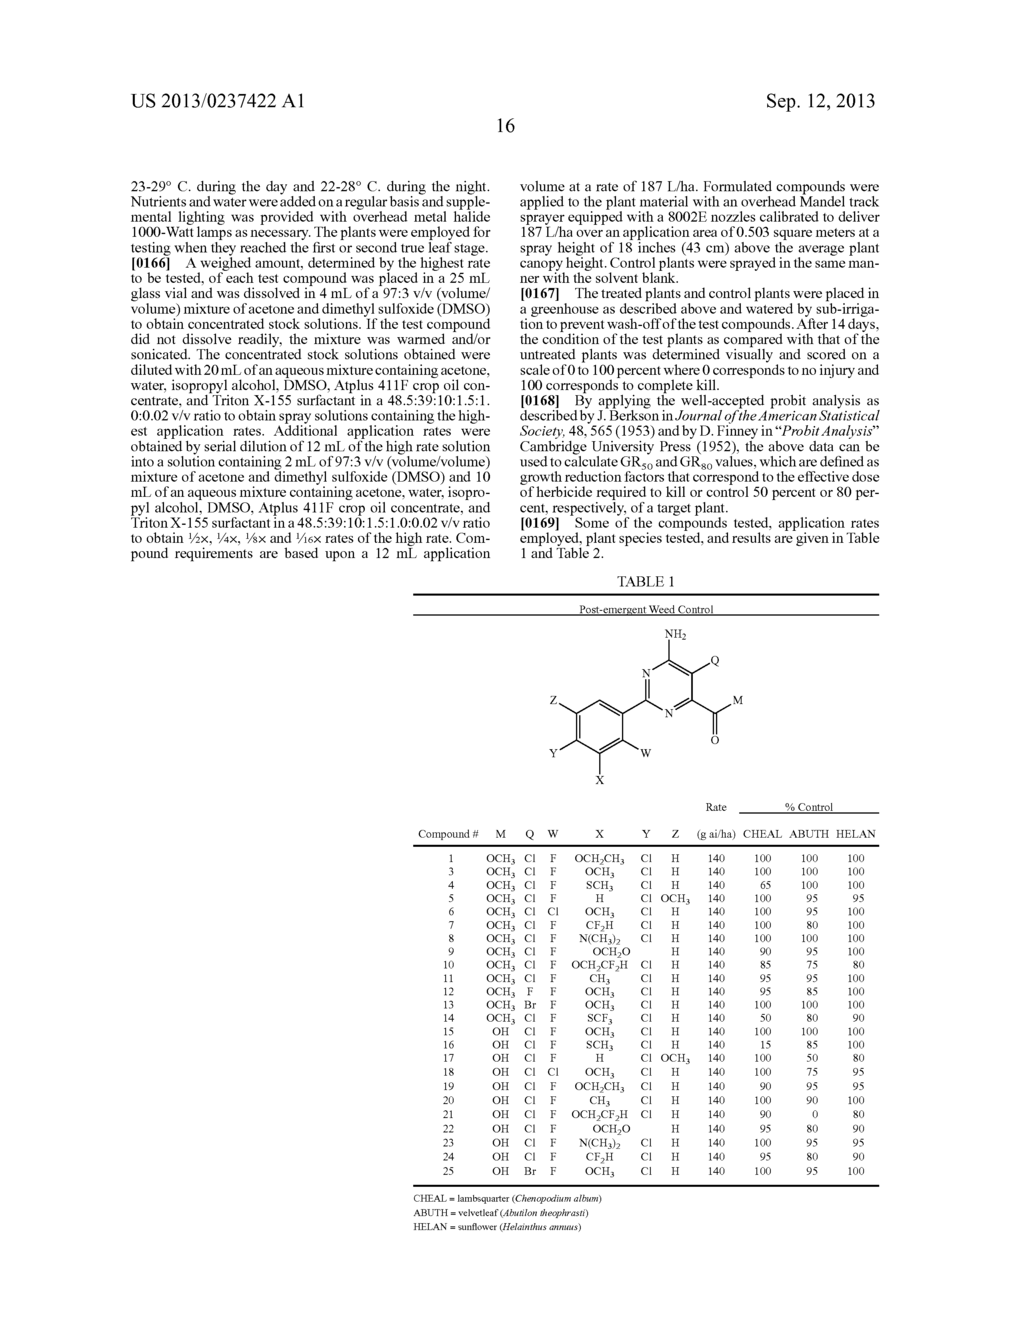 2-(POLY-SUBSTITUTED ARYL)-6-AMINO-5-HALO-4-PYRIMIDINECARBOXYLIC ACIDS AND     THEIR USE AS HERBICIDES - diagram, schematic, and image 17